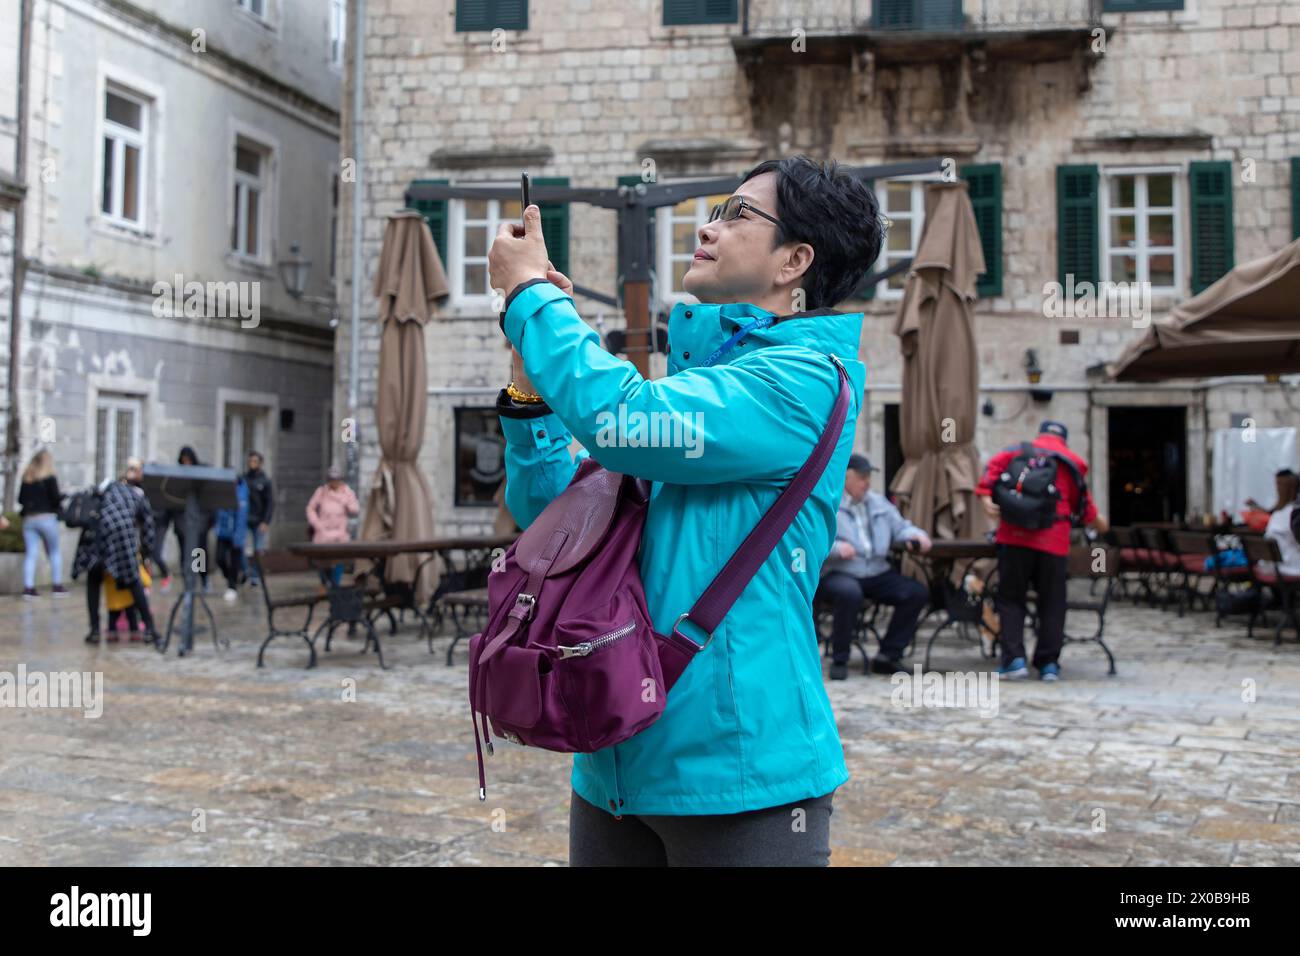 Kotor, Montenegro, Apr 30, 2019: A tourist takes photos of the St. Tryphon Square in Old Town Stock Photo